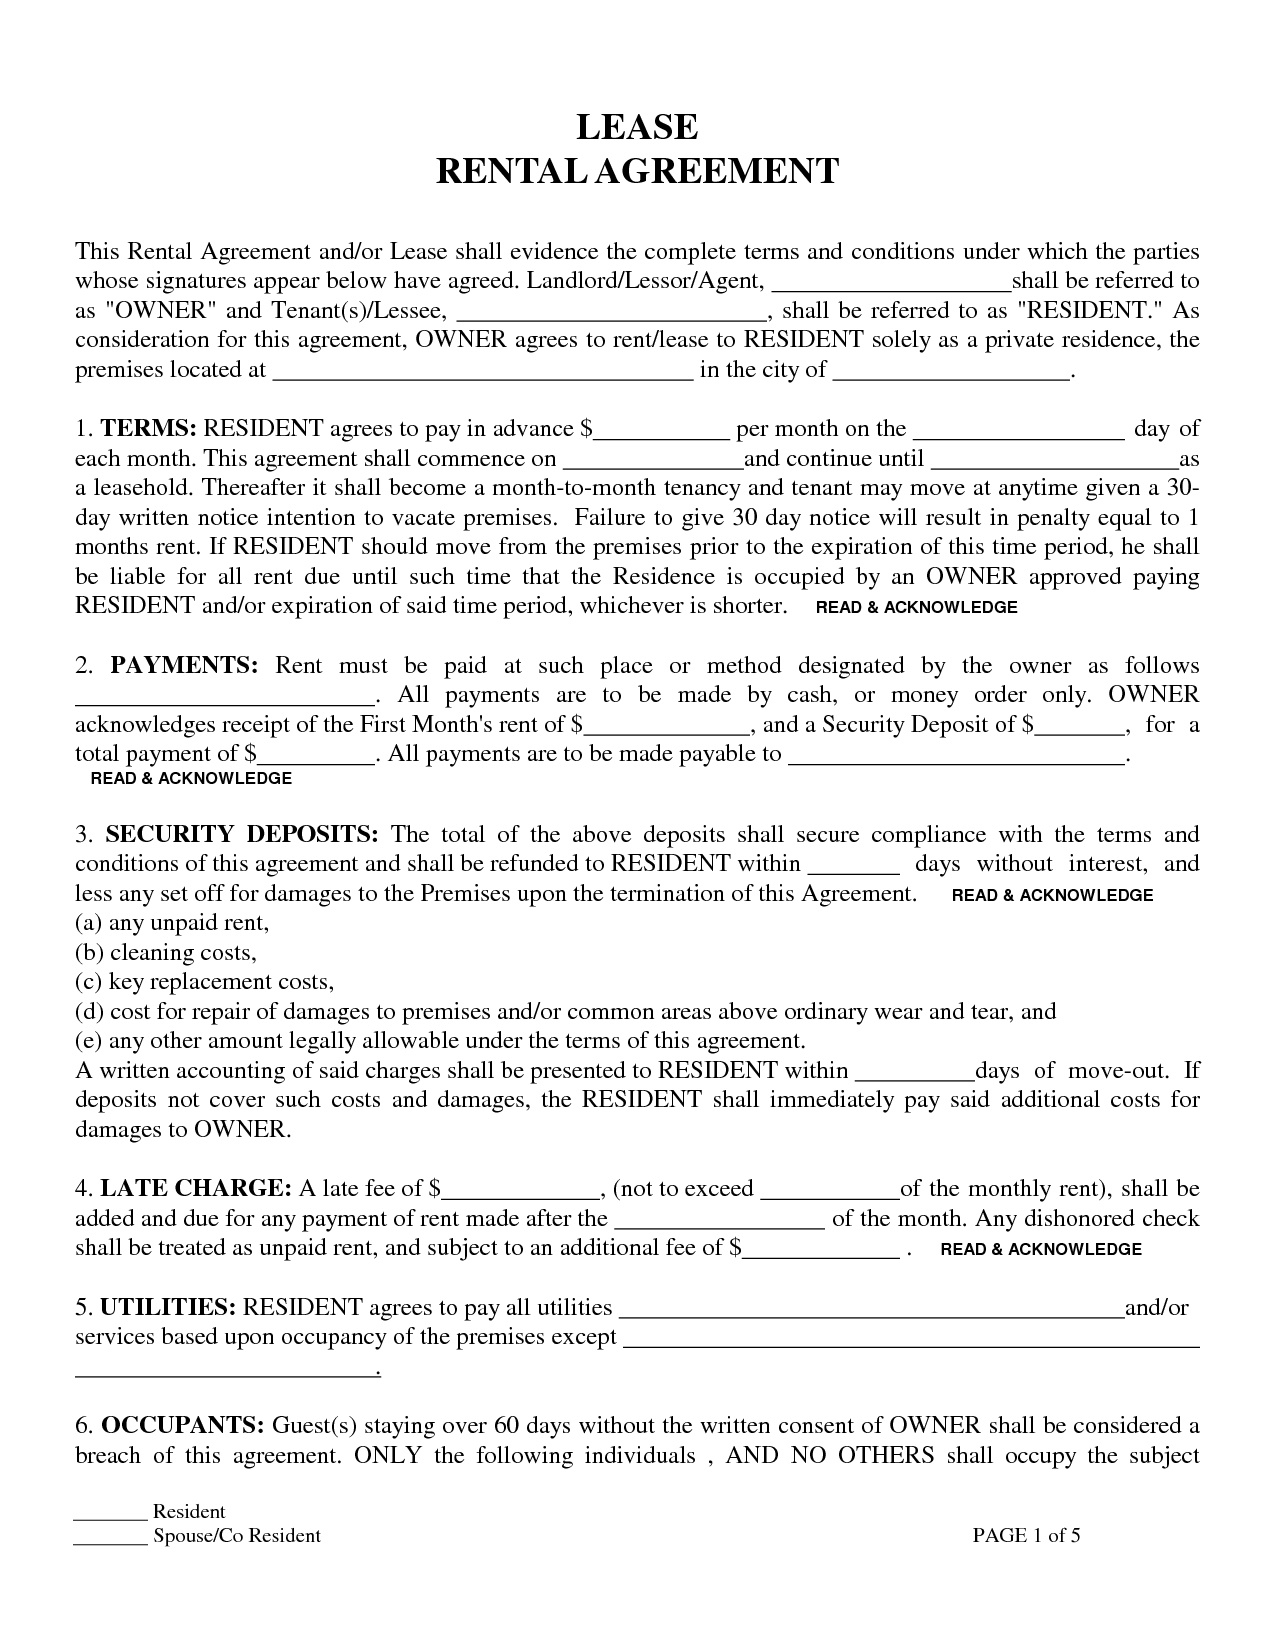 Free Printable Lease Forms Online | Shop Fresh - Rental Agreement Forms Free Printable